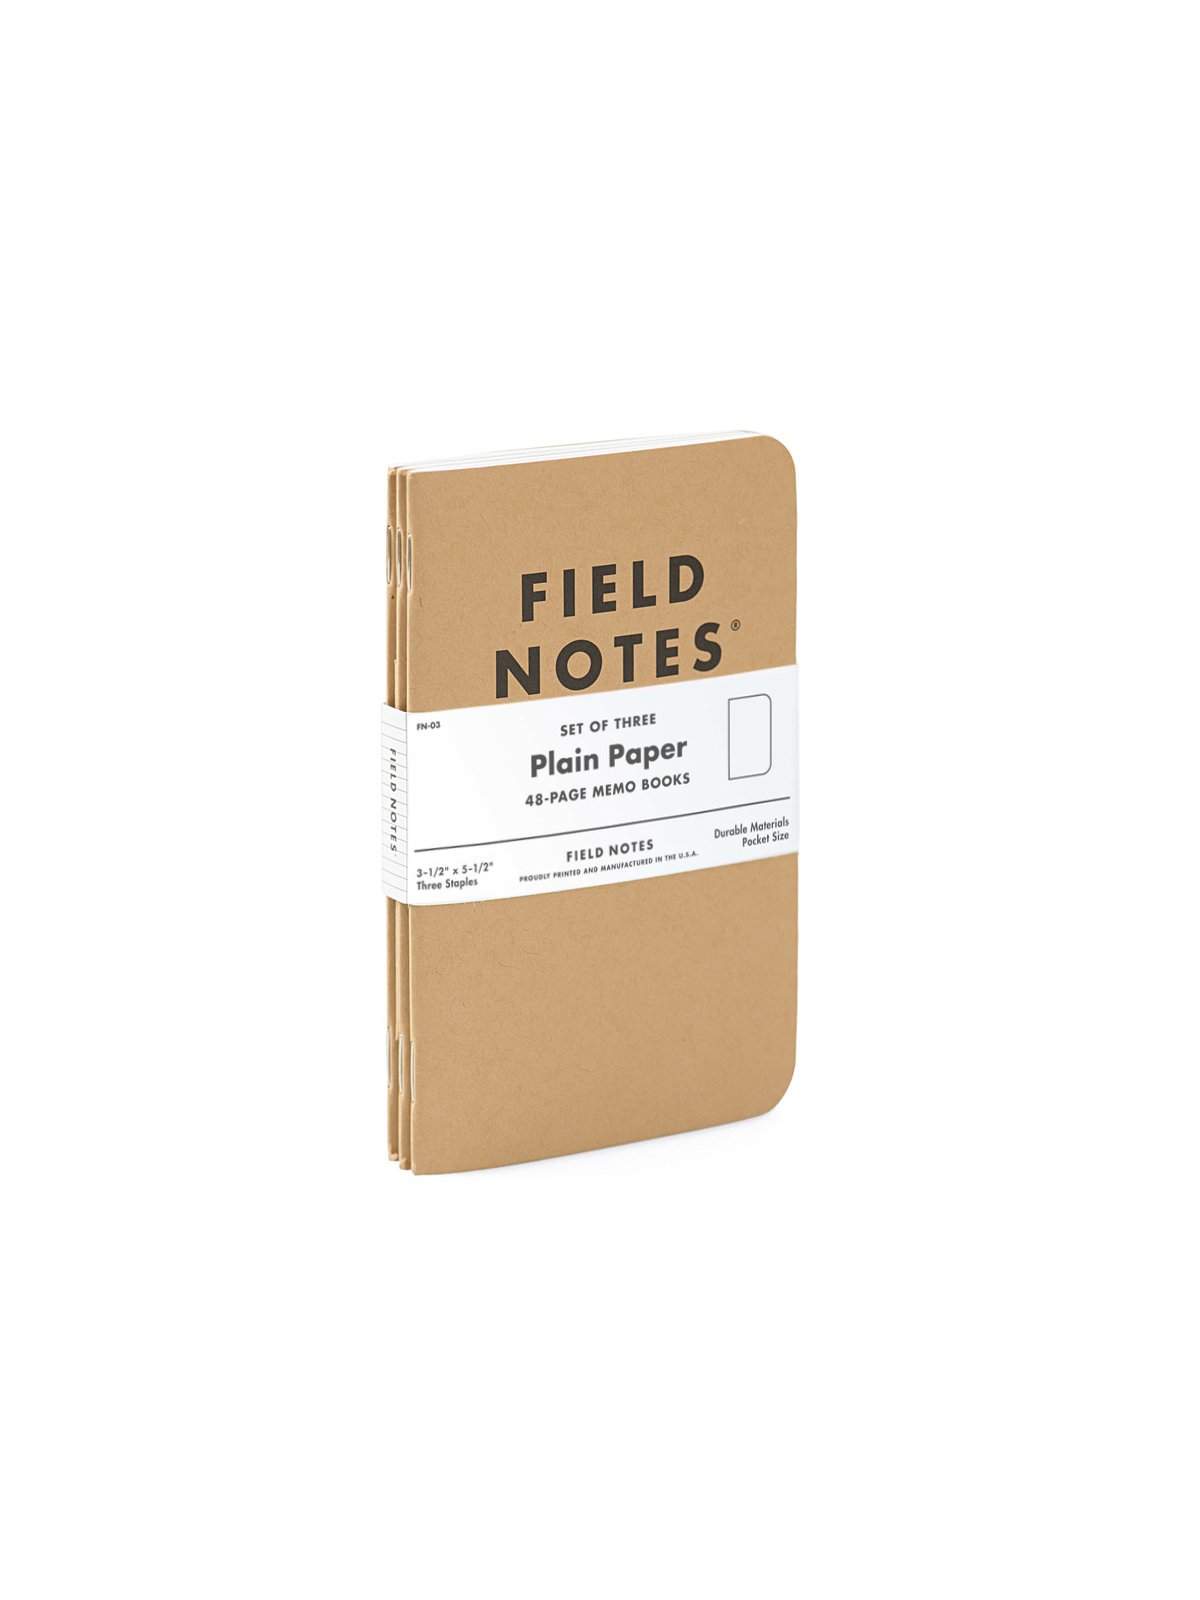 Field Notes Original Kraft 3 Pack Plain Paper - MORE by Morello Indonesia